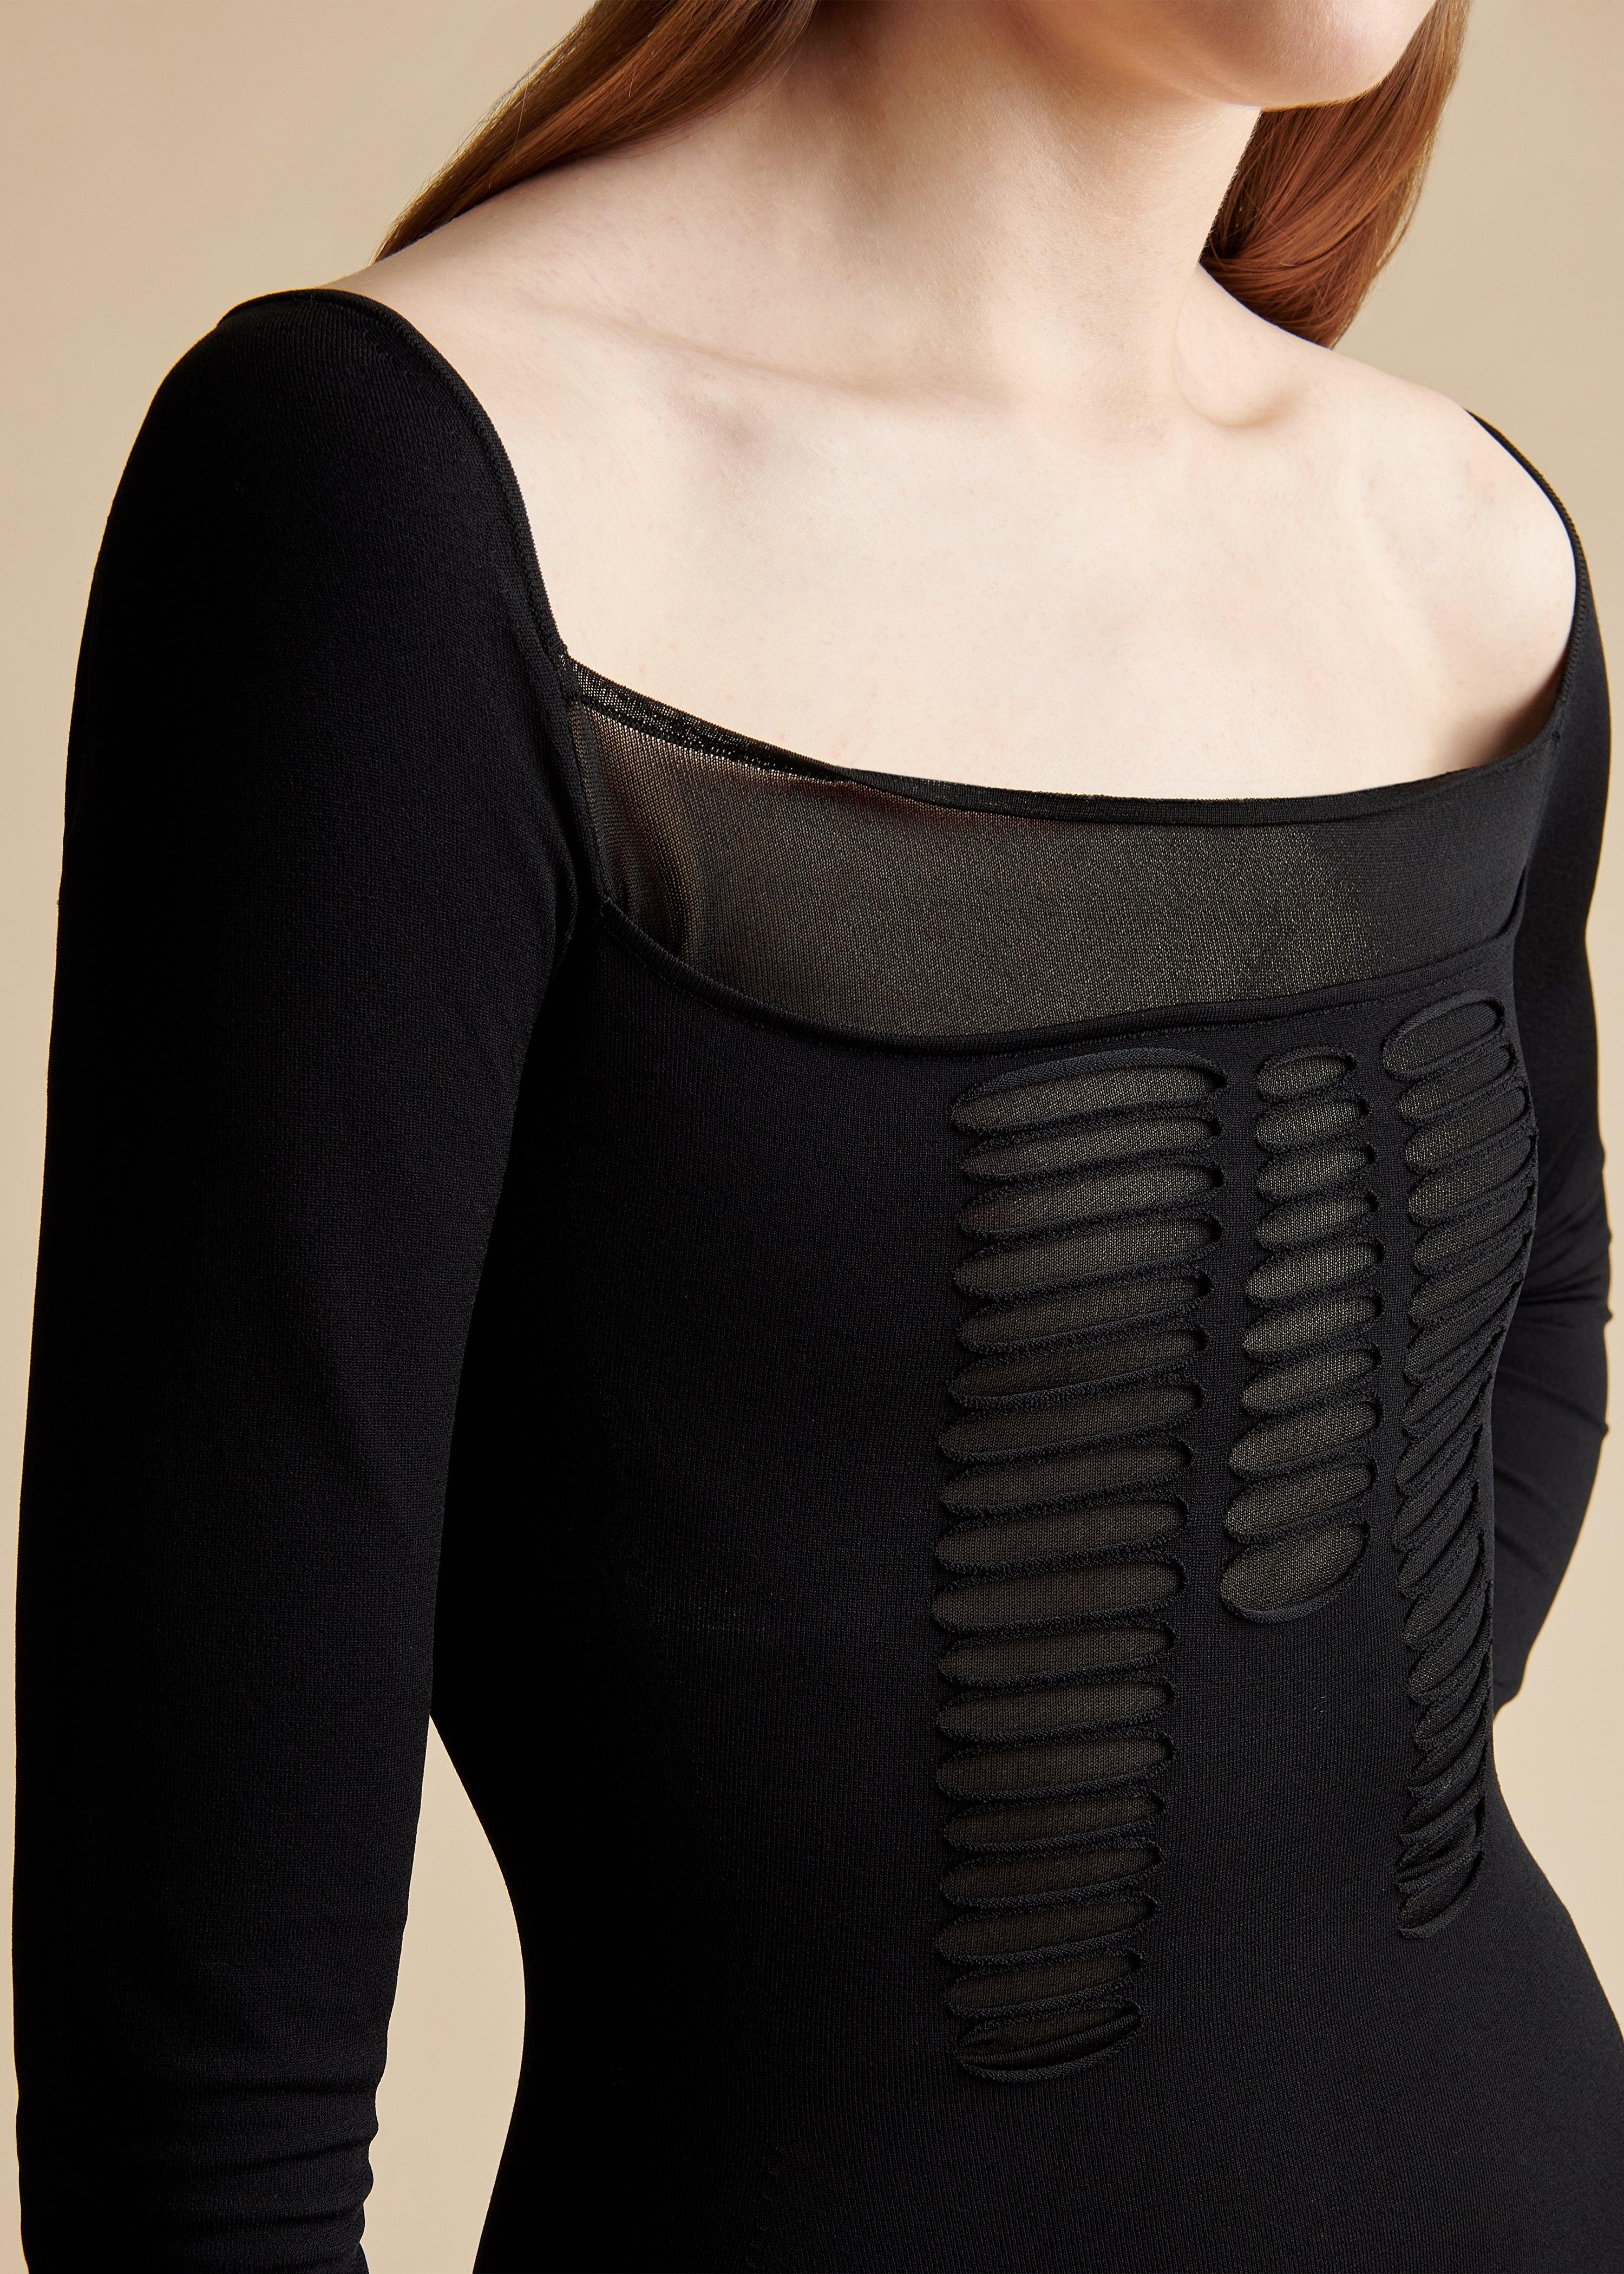 The Aslana Top in Black - The Iconic Issue